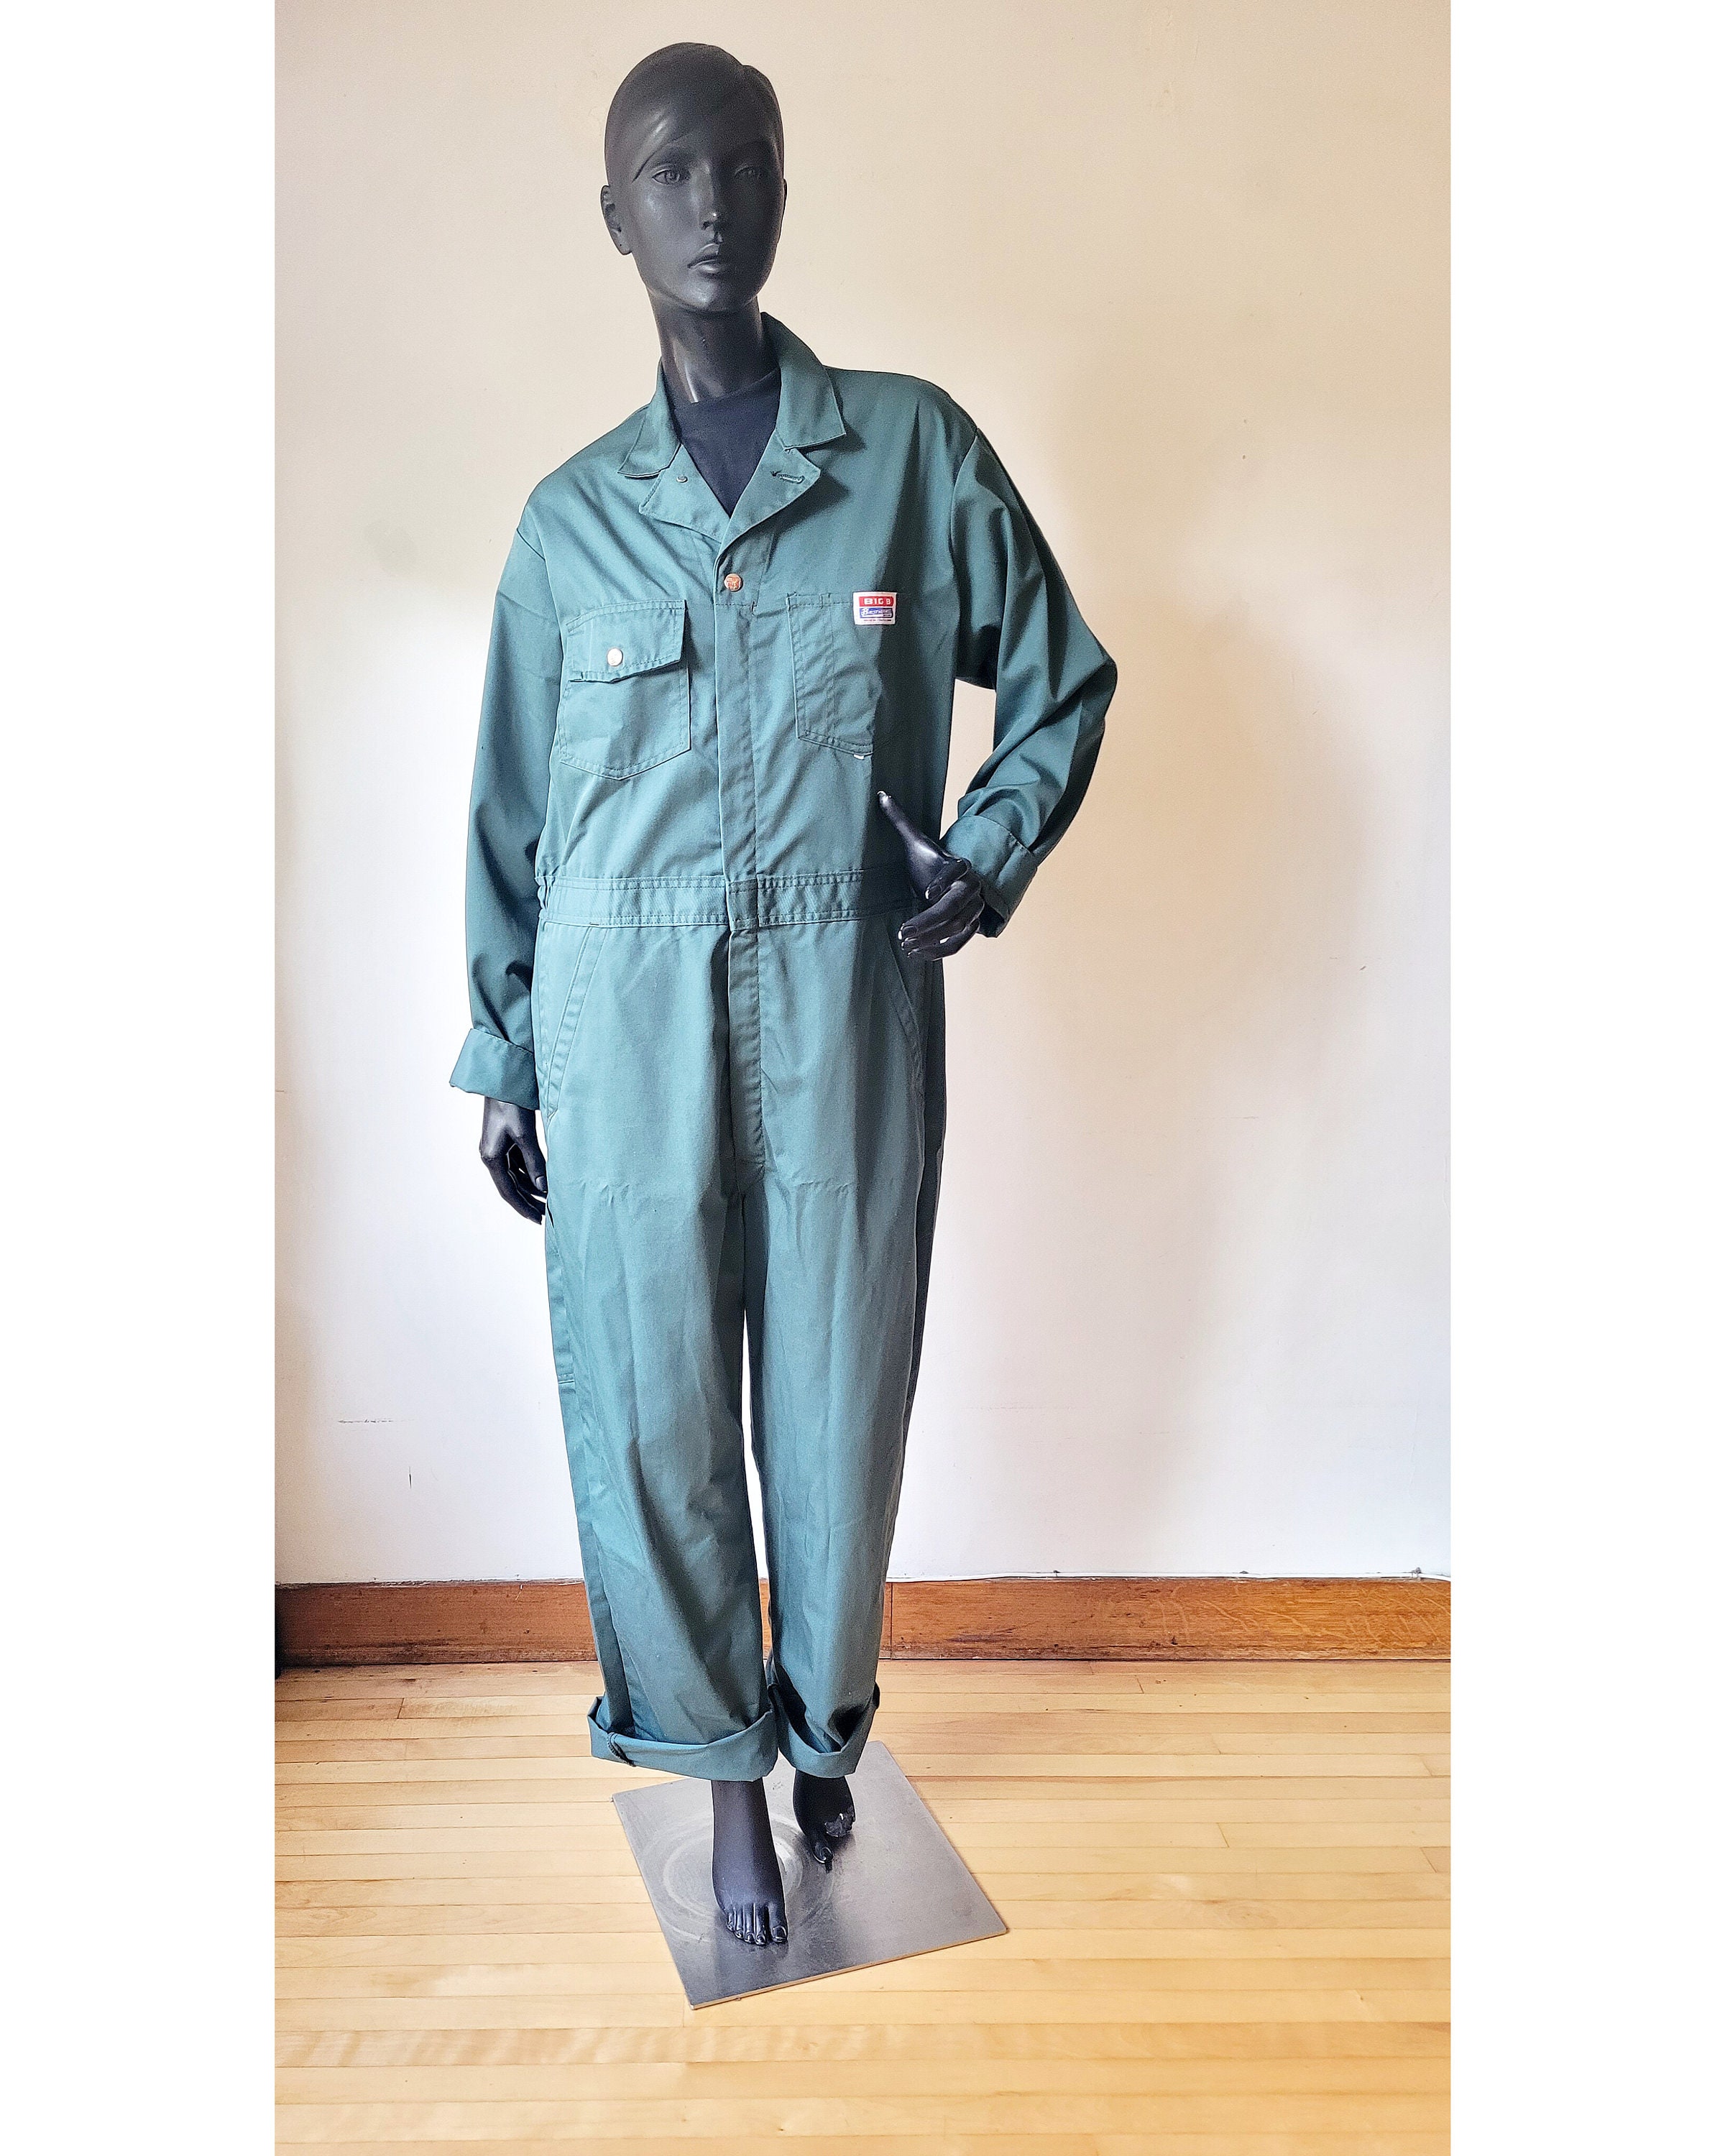 Vintage 1980s US Military Flyer Coverall Jumpsuit / Vintage Coveralls –  LOST BOYS VINTAGE